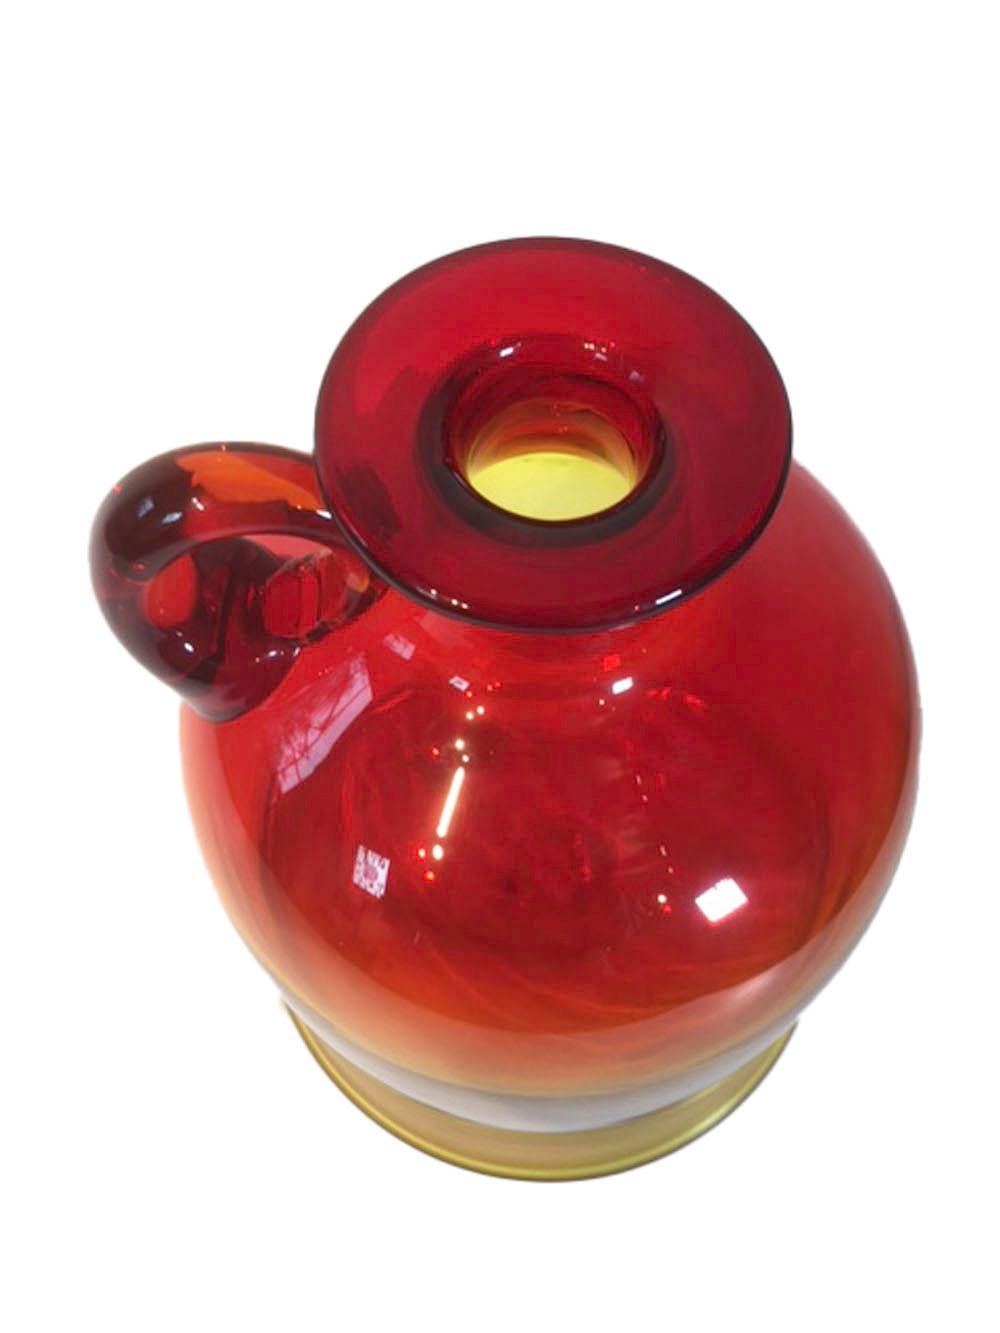 Mid-20th century Blenko glass moonshine jug in amberina - large size of rounded bell form having a single applied loop handle below the flared mouth and an out-turned rim at the base. Vibrant yellow base graduating through orange to red at the top.